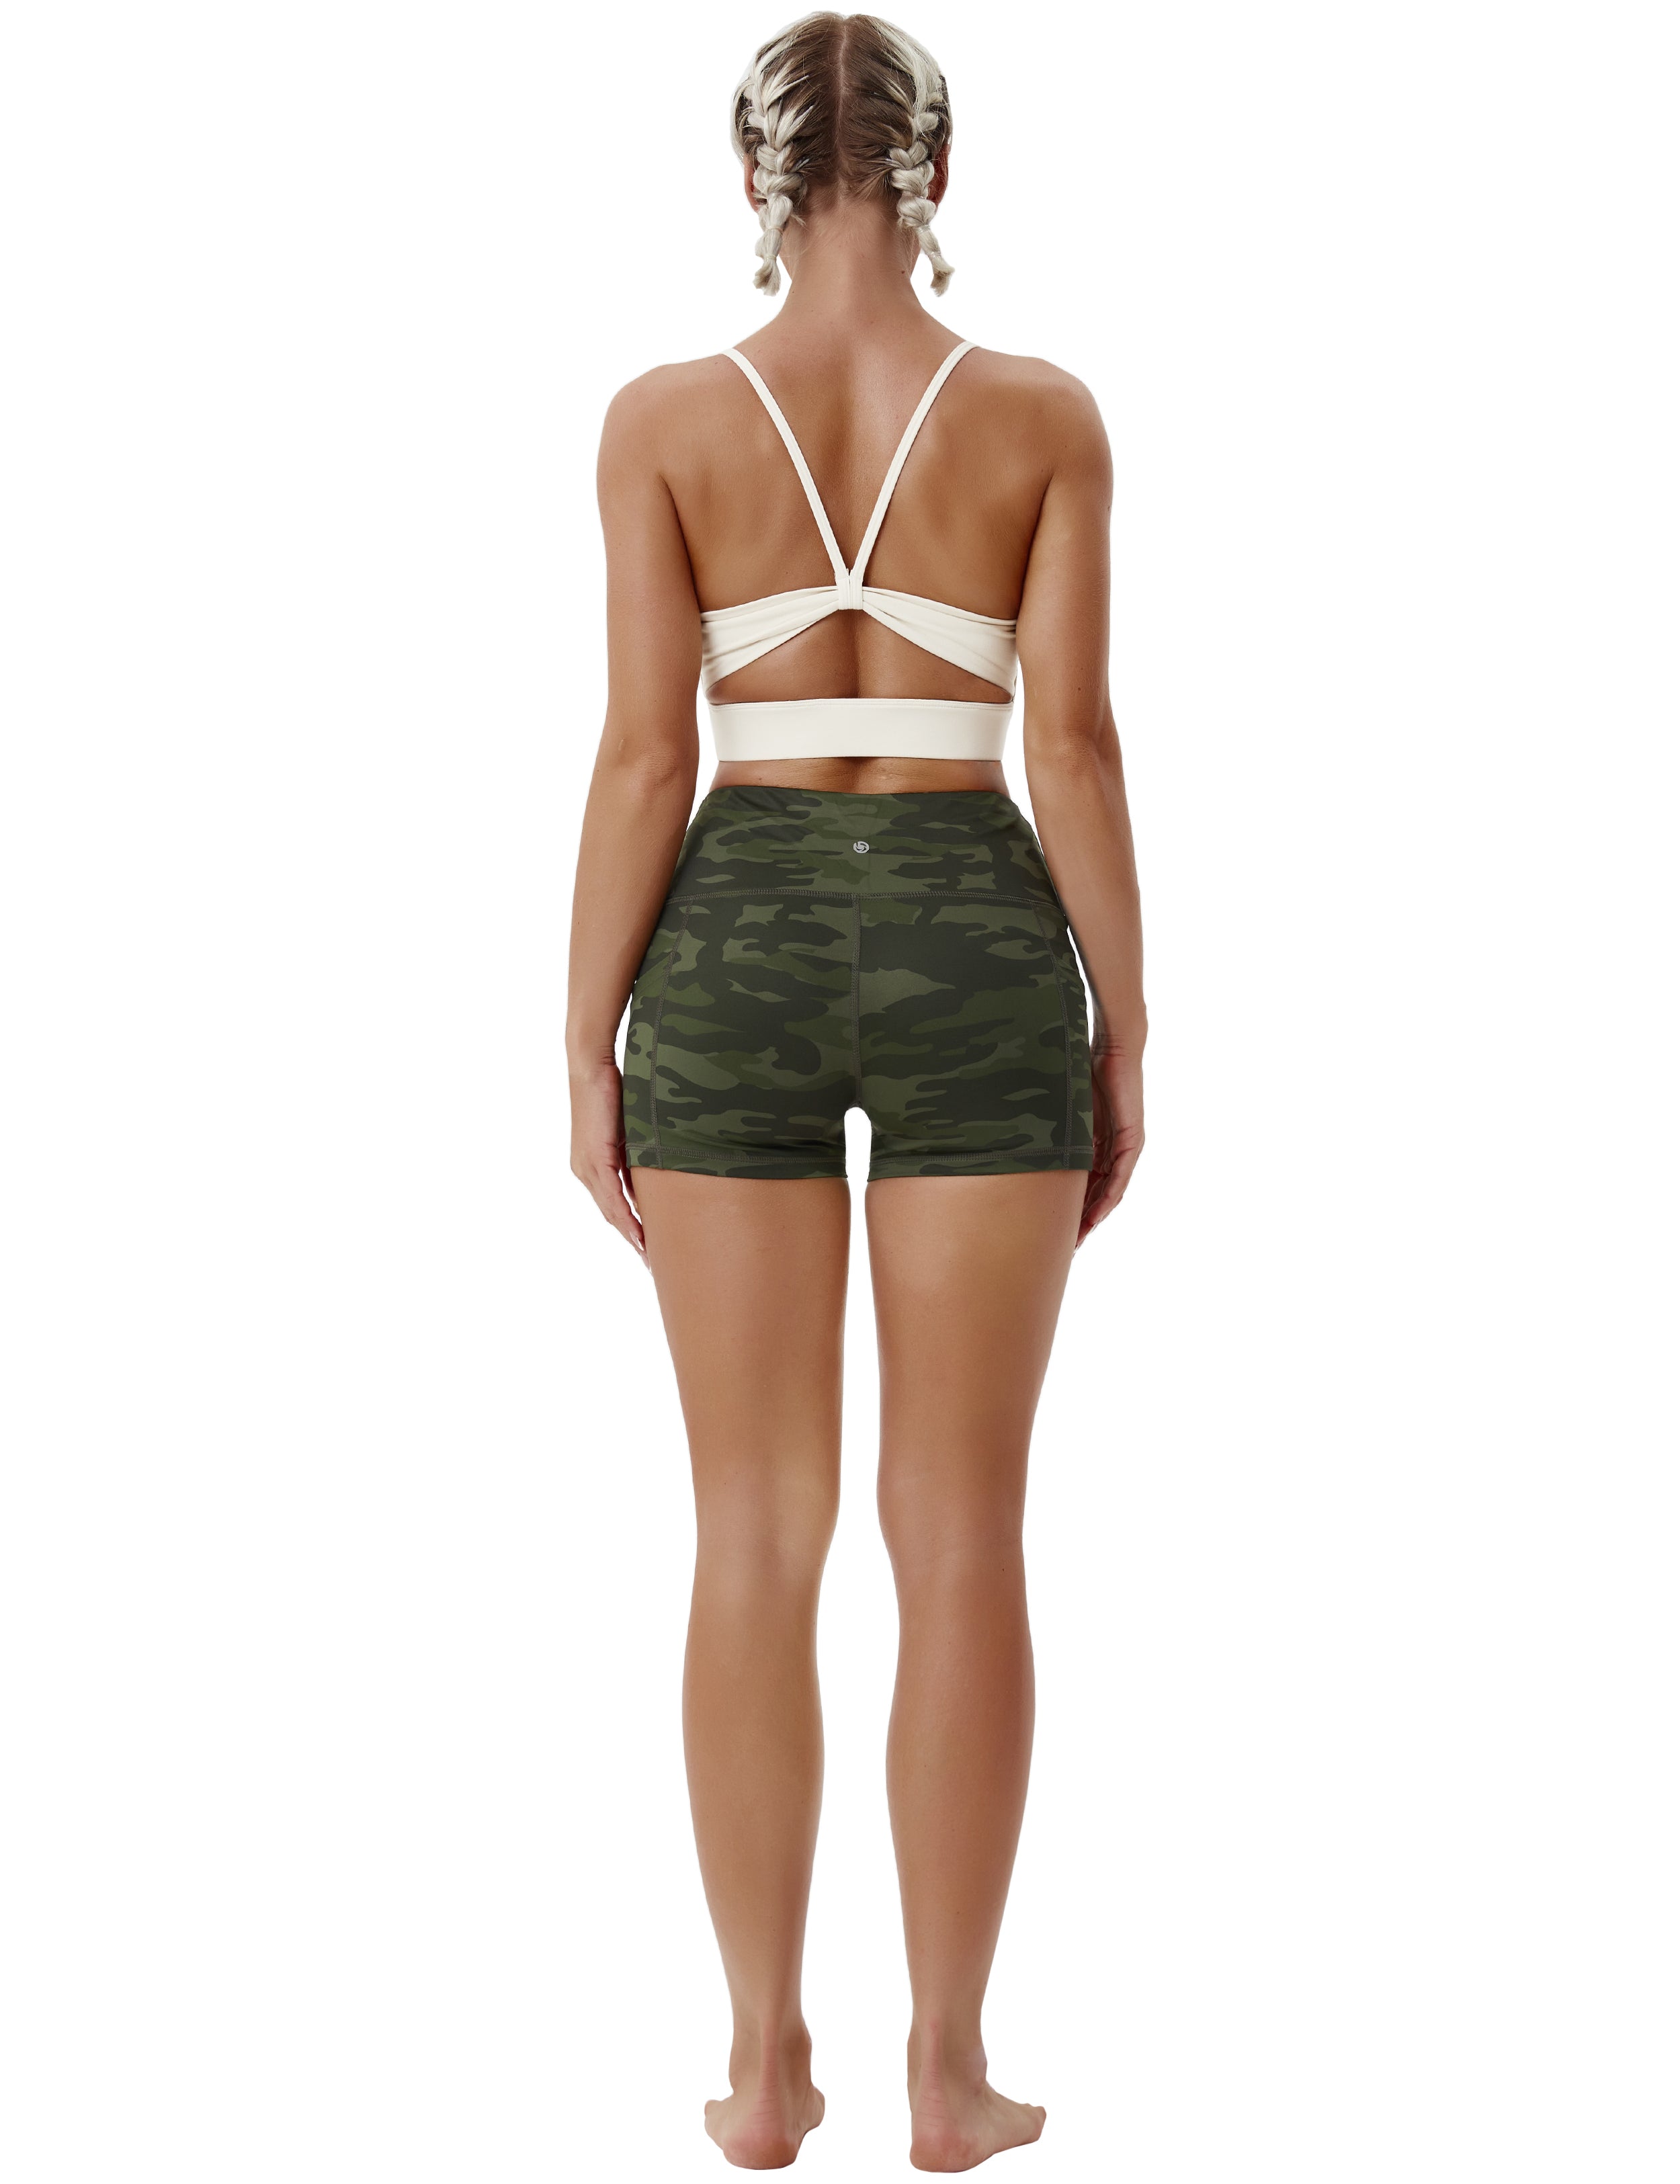 2.5" Printed Side Pockets Golf Shorts green camo Sleek, soft, smooth and totally comfortable: our newest sexy style is here. Softest-ever fabric High elasticity High density 4-way stretch Fabric doesn't attract lint easily No see-through Moisture-wicking Machine wash 78% Polyester, 22% Spandex